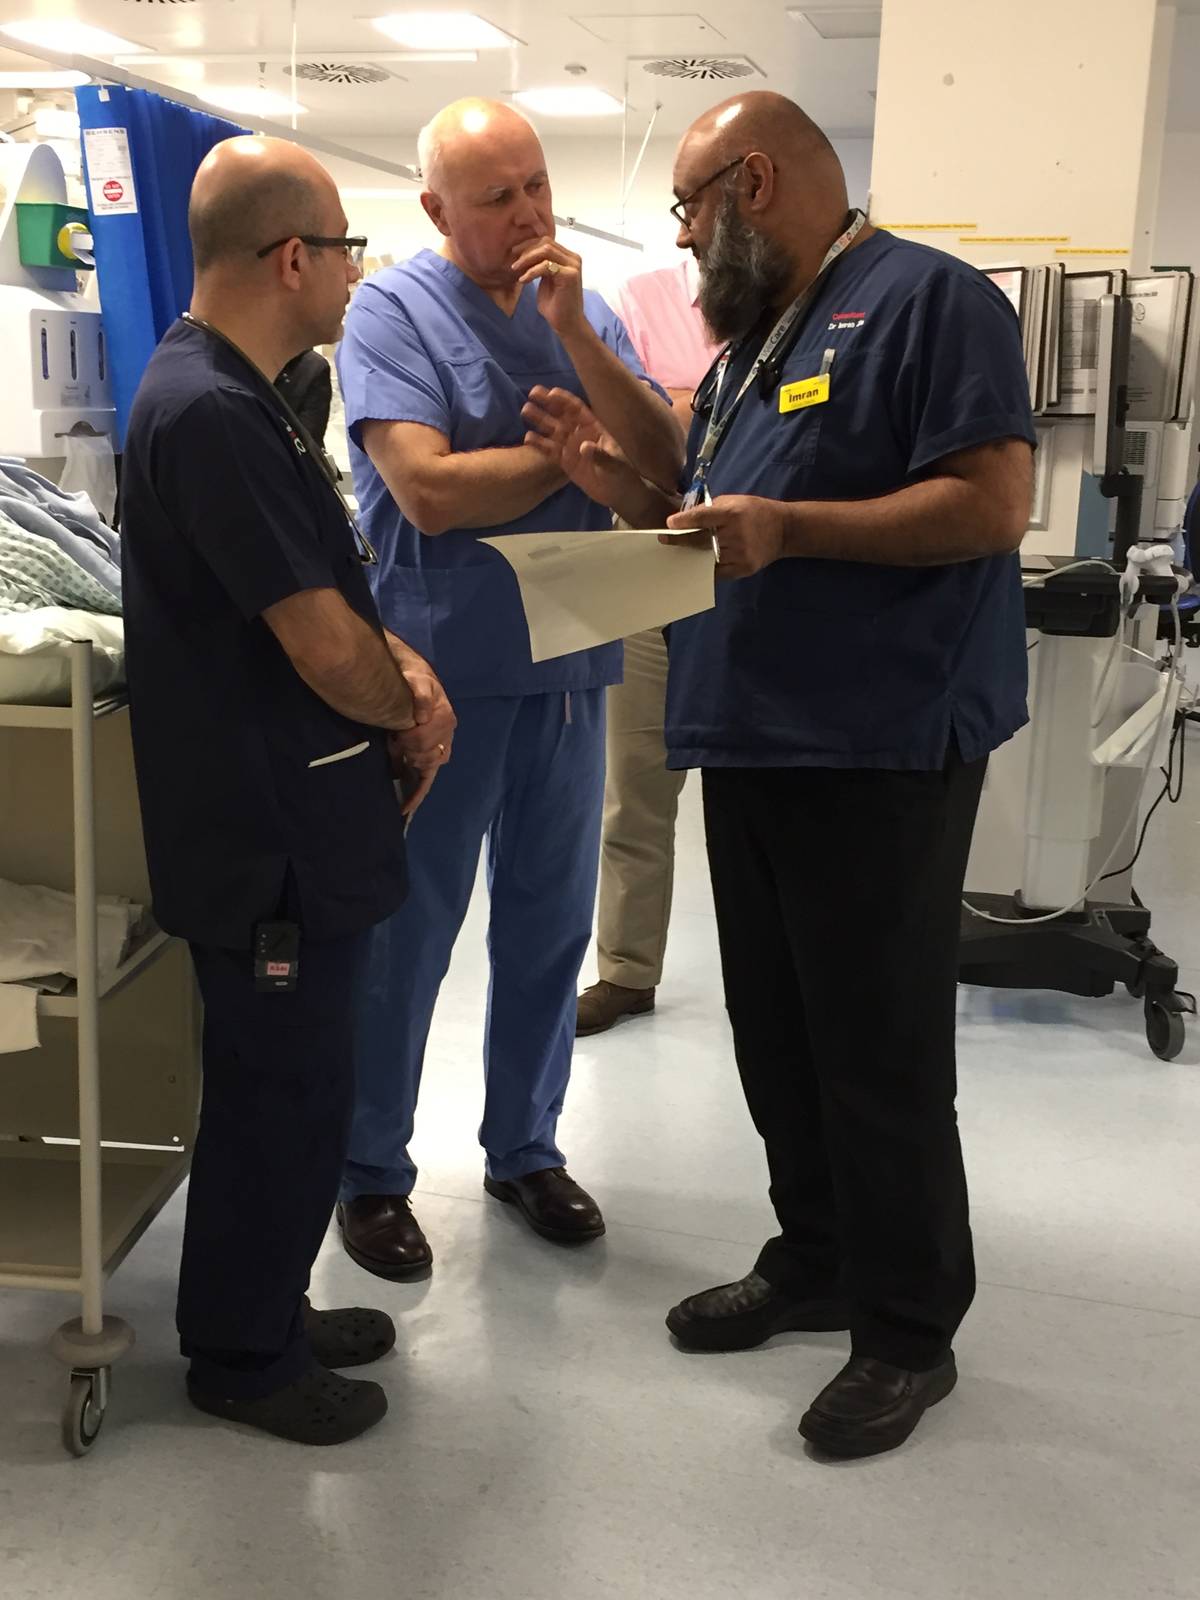 Iain Duncan Smitth with two members of staff at Whipps Cross Hospital